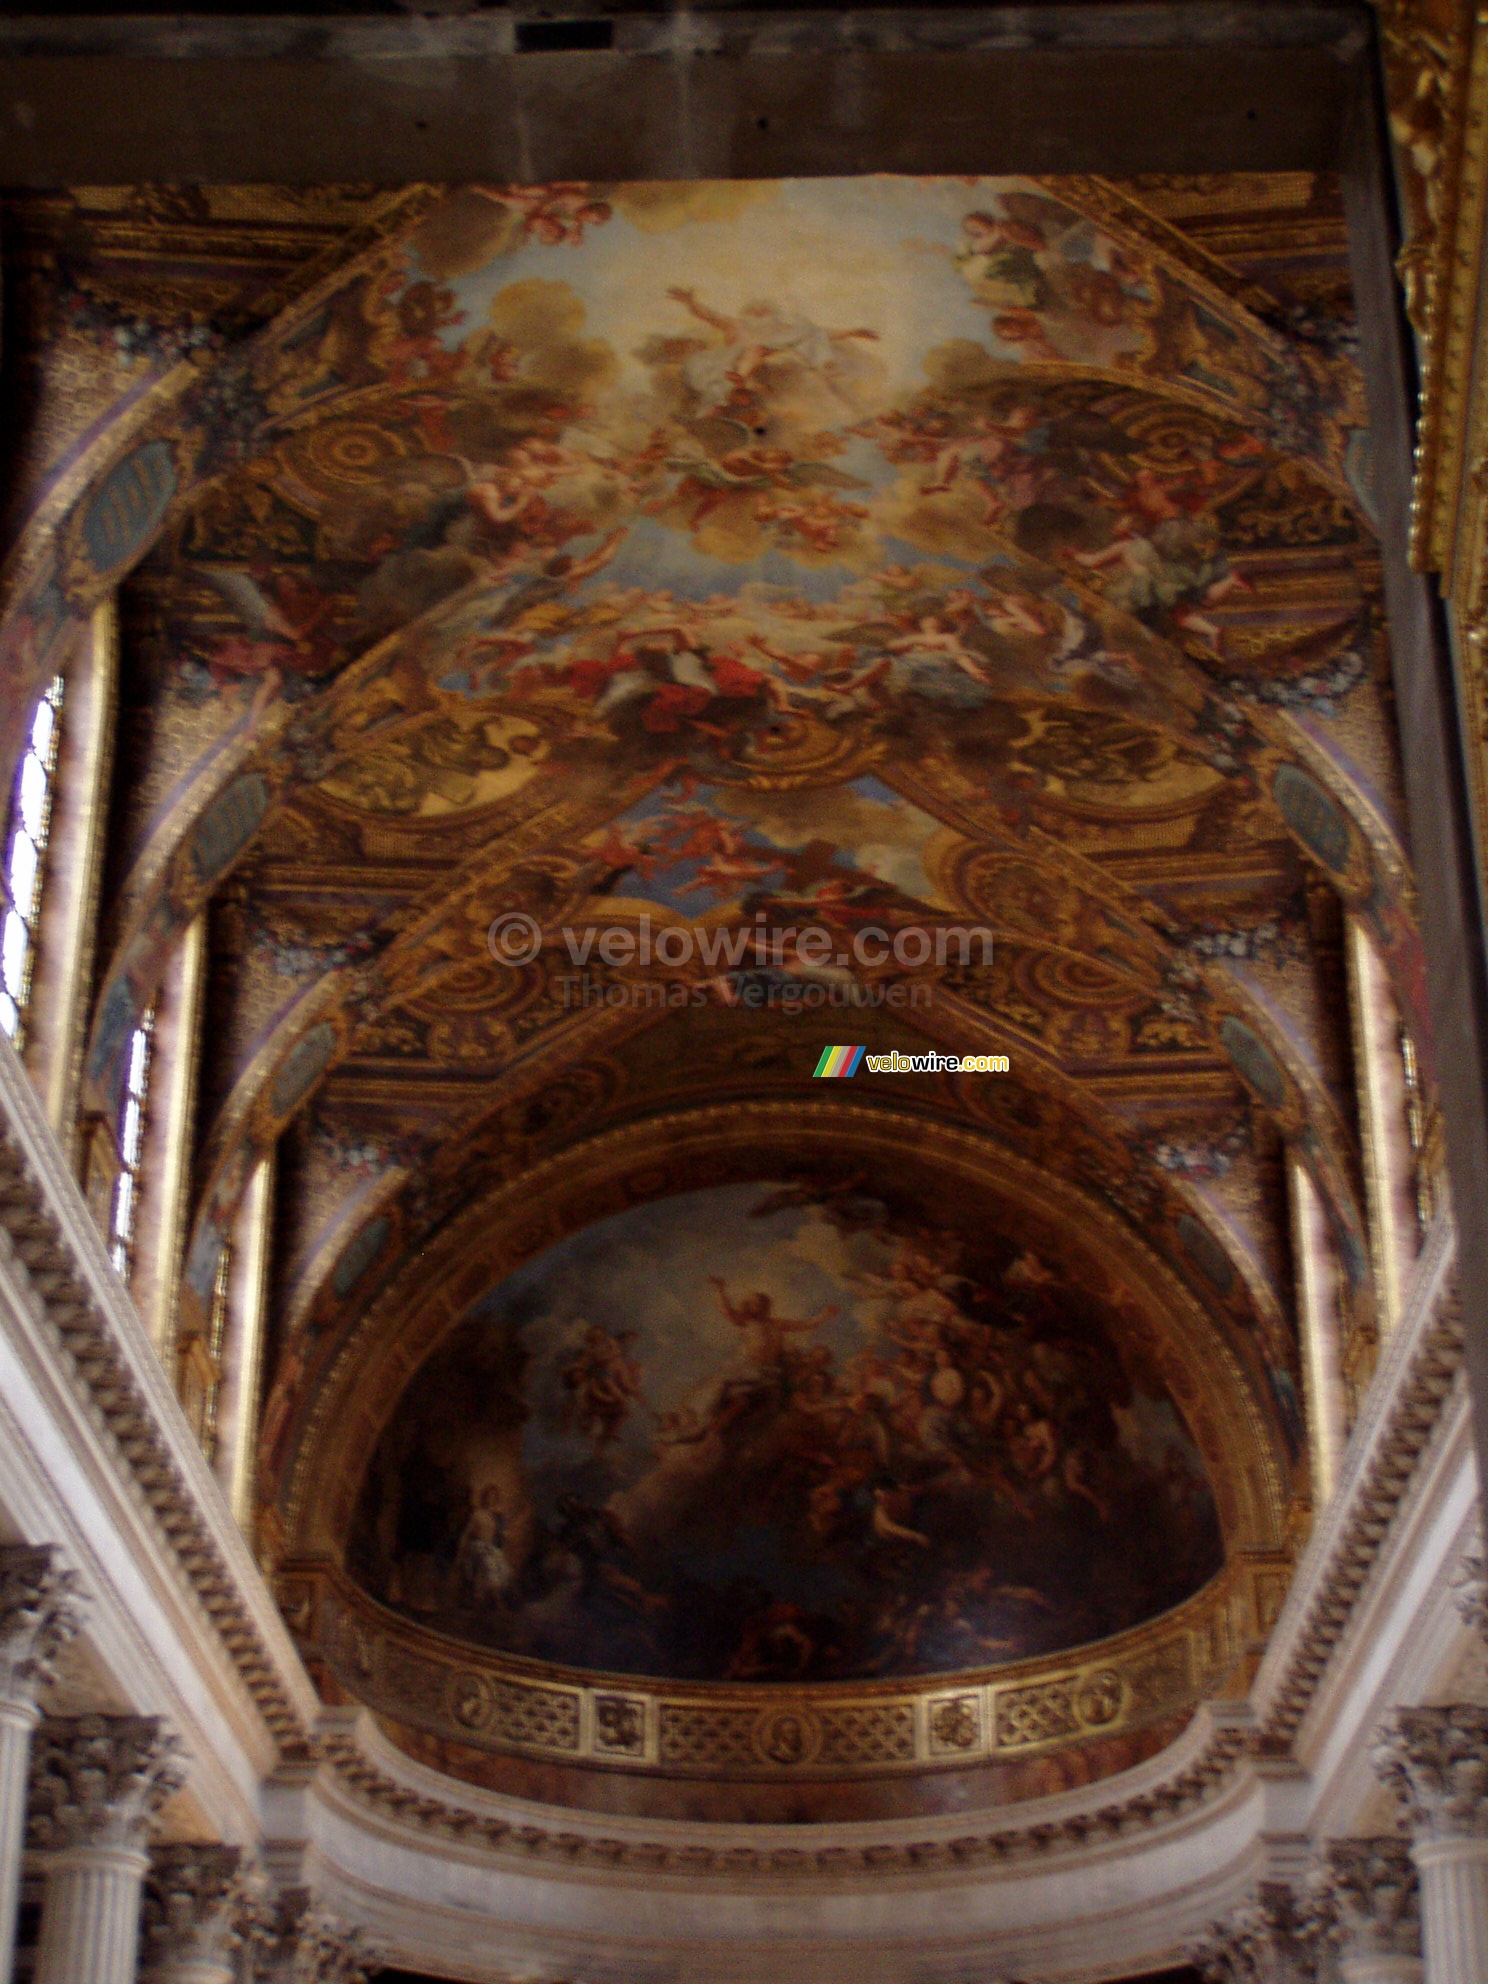 The ceiling of the chappel of the castle of Versailles